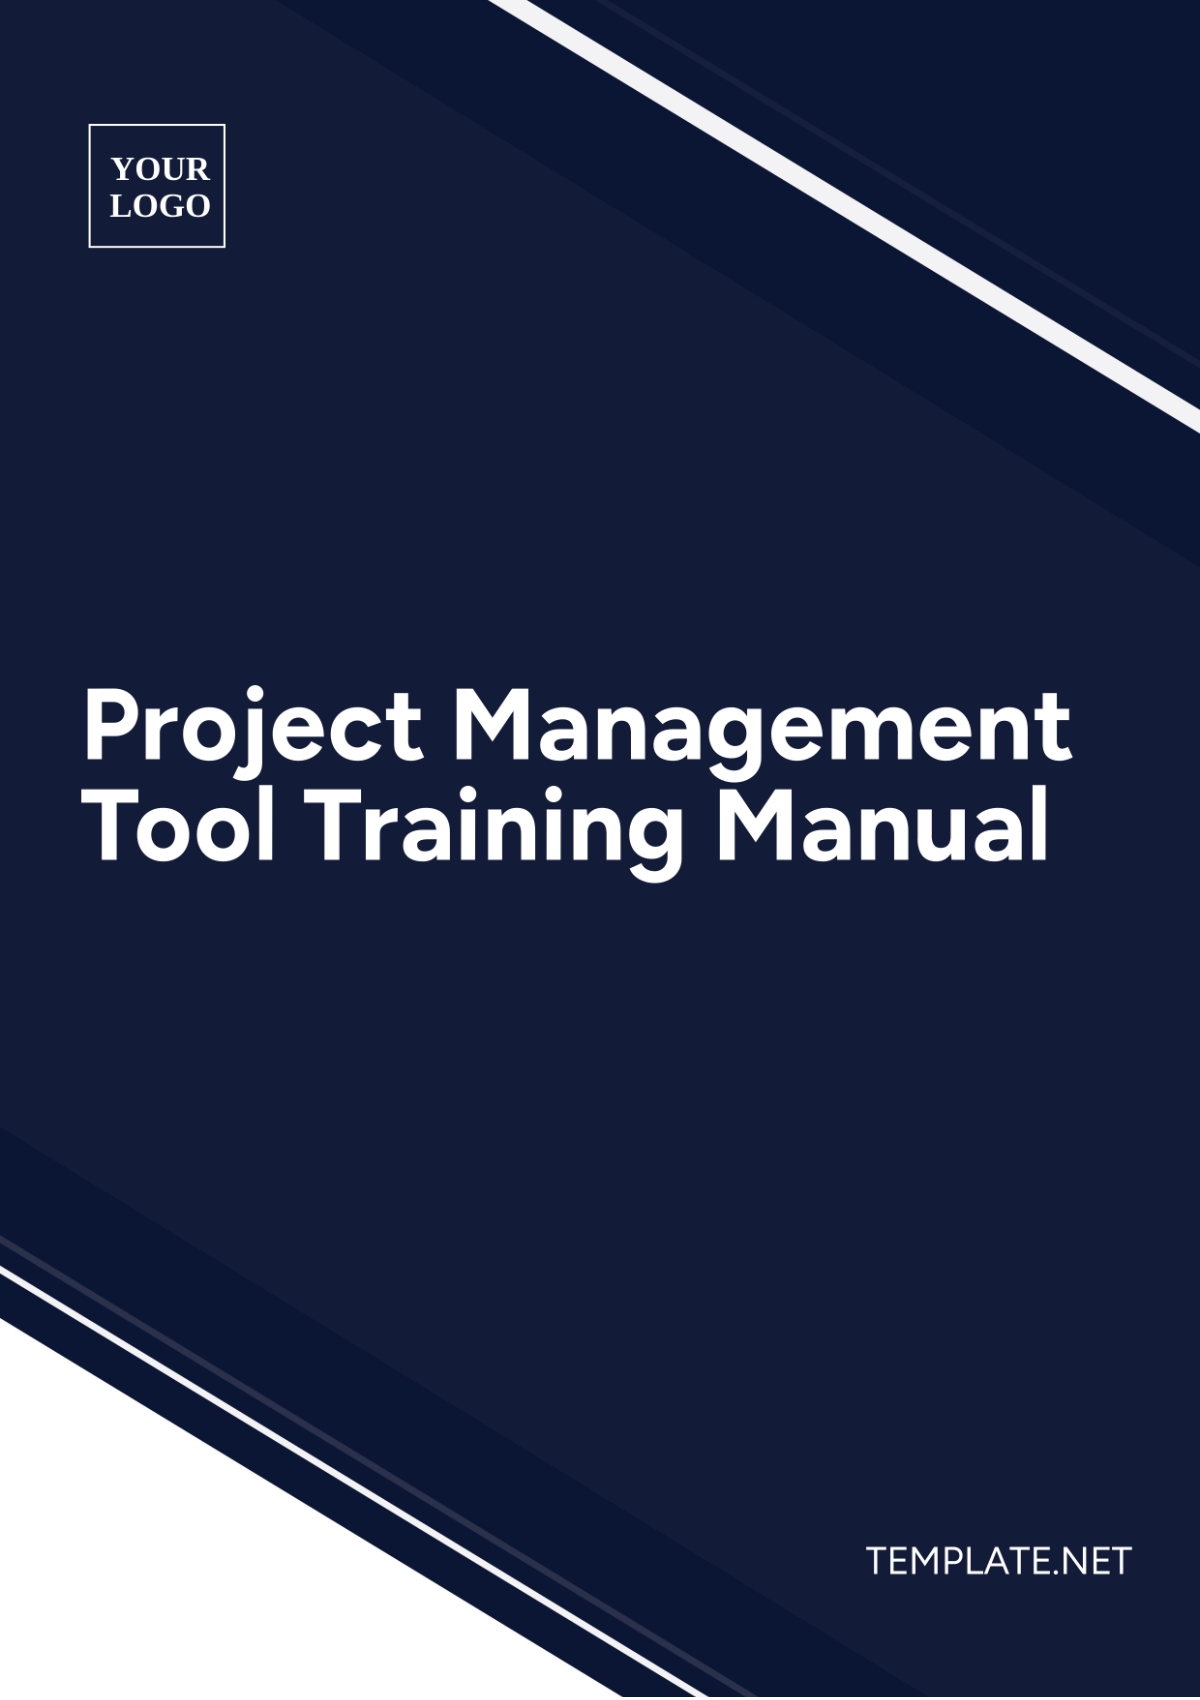 Free Project Management Tool Training Manual Template